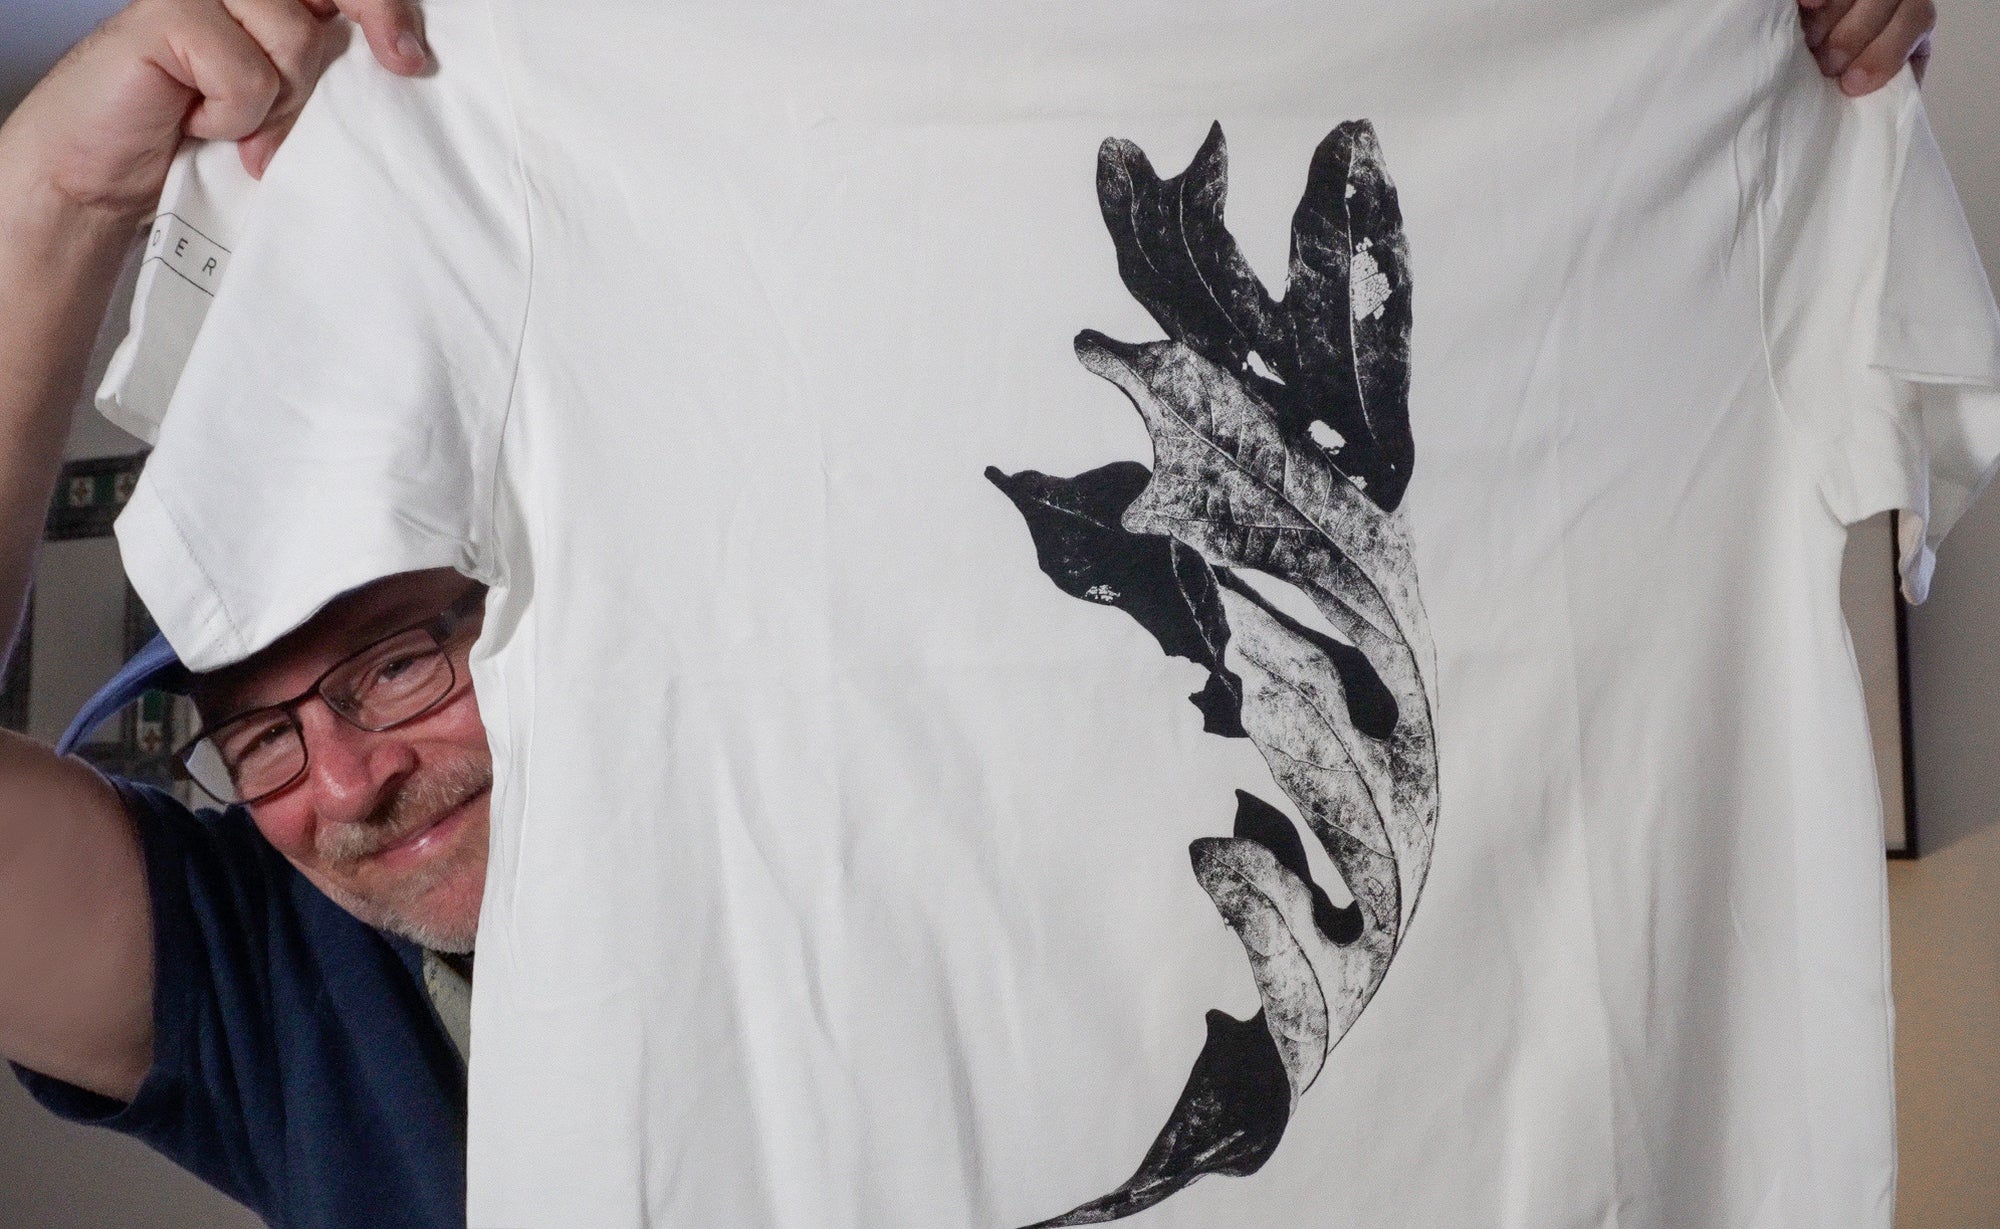 Photograph of Keith Dotson holding up the MADERA t-shirt featuring his Curled Autumn Leaf photograph